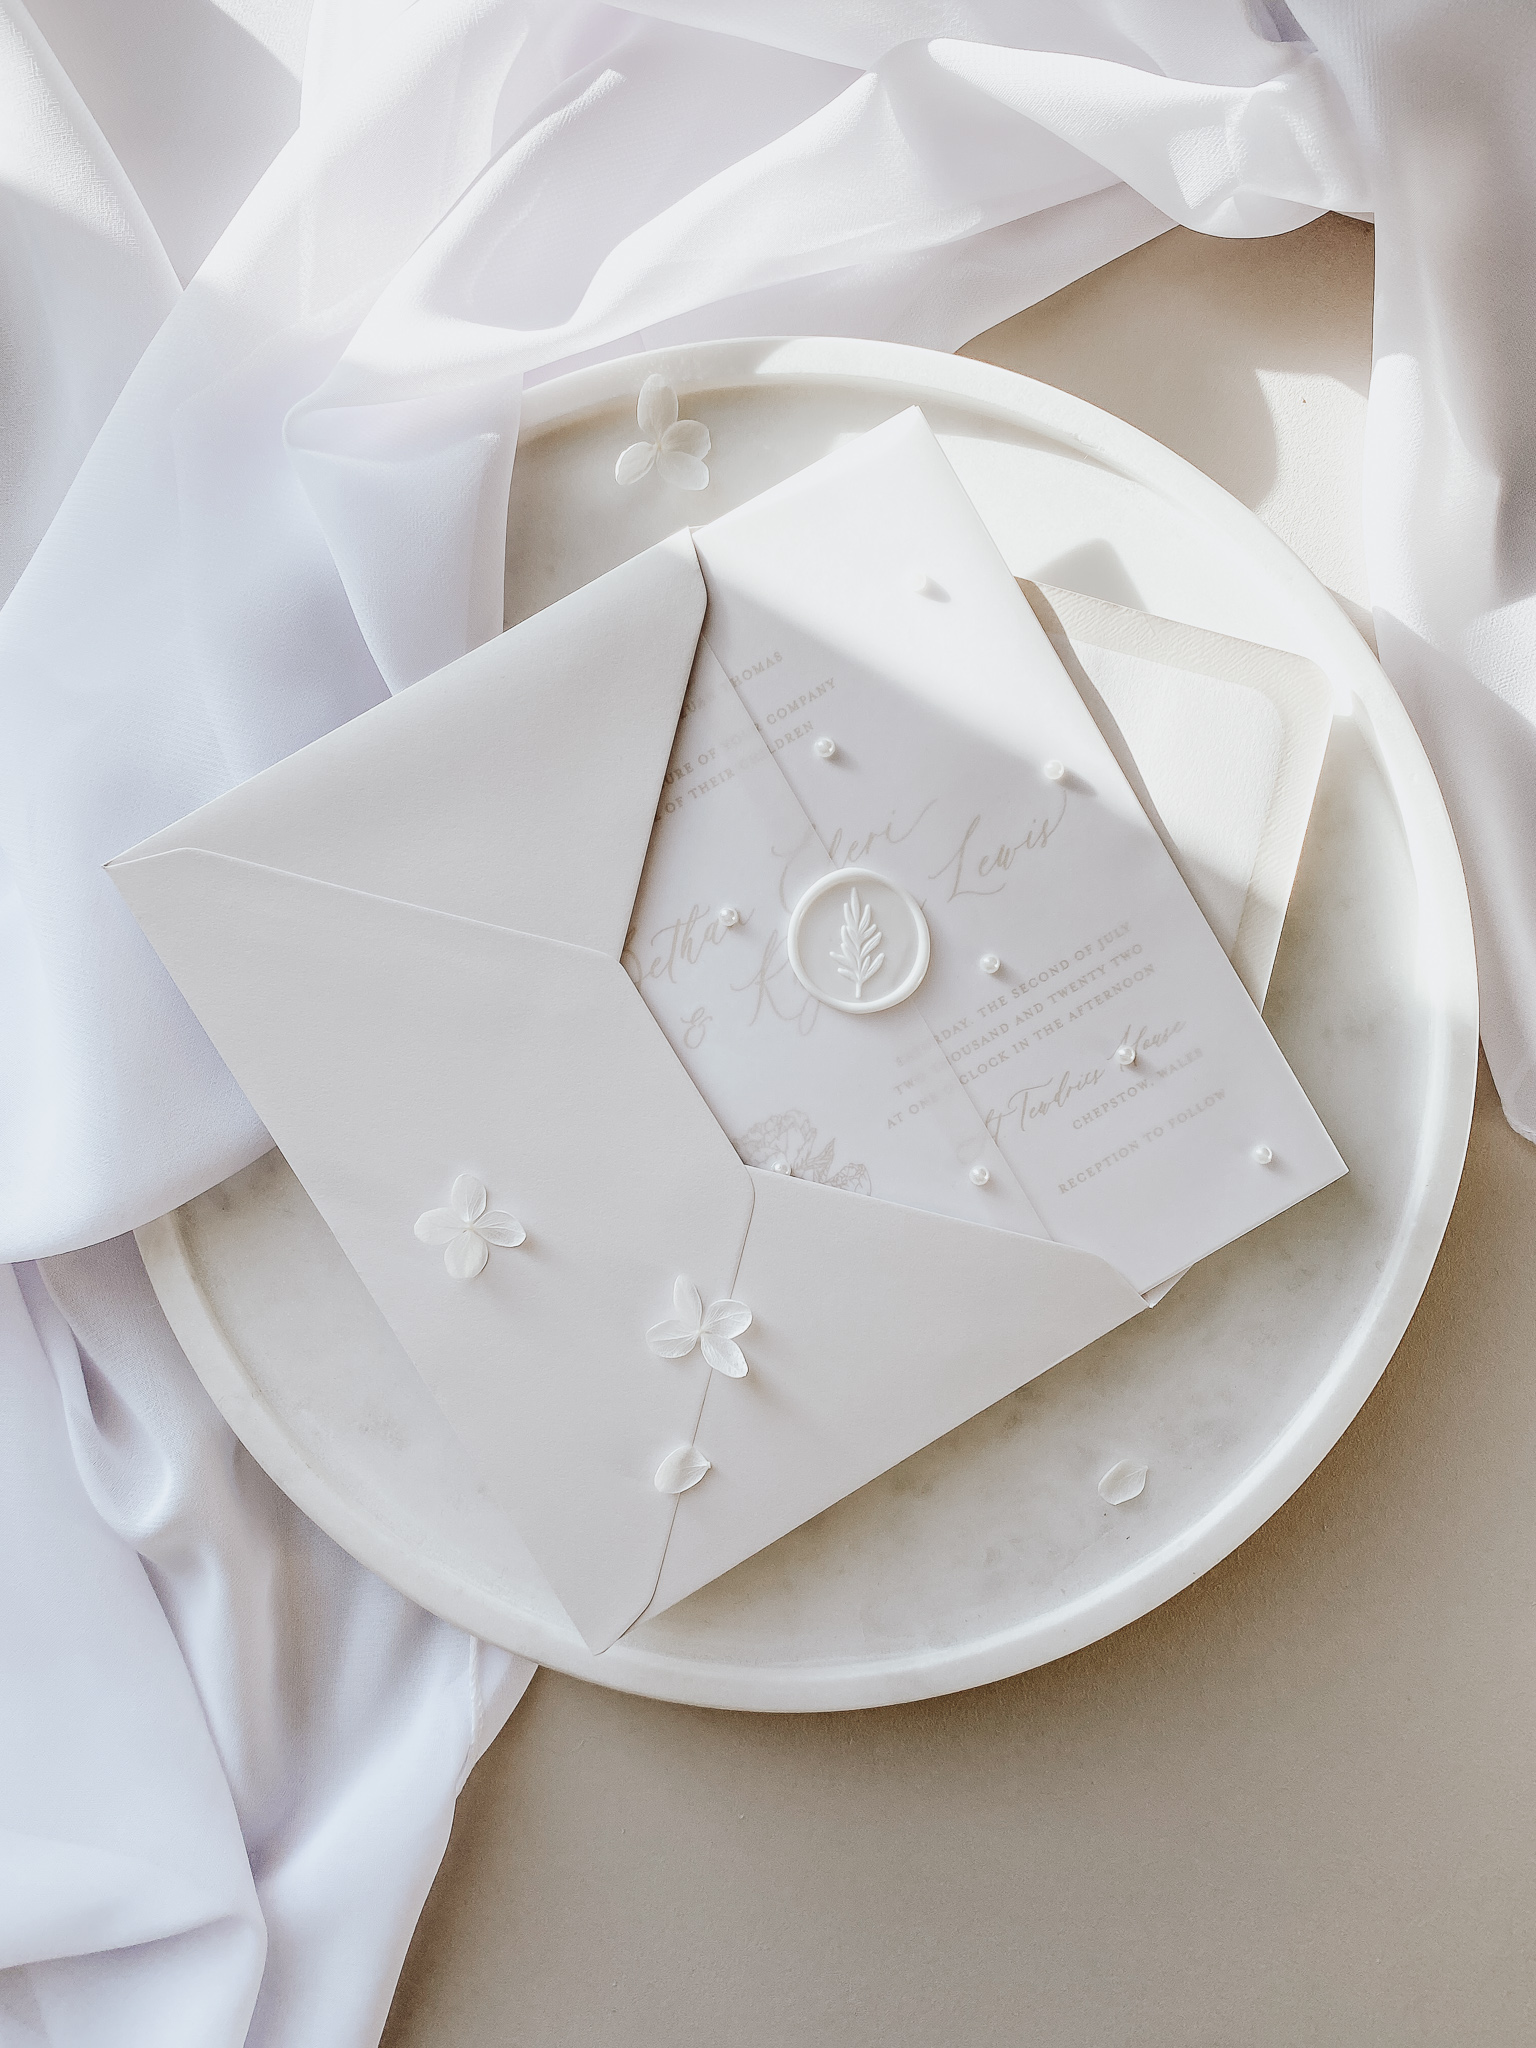 Elegant neutral wedding invitation wrapped in a vellum sleeve decorated with pearl embellishment.